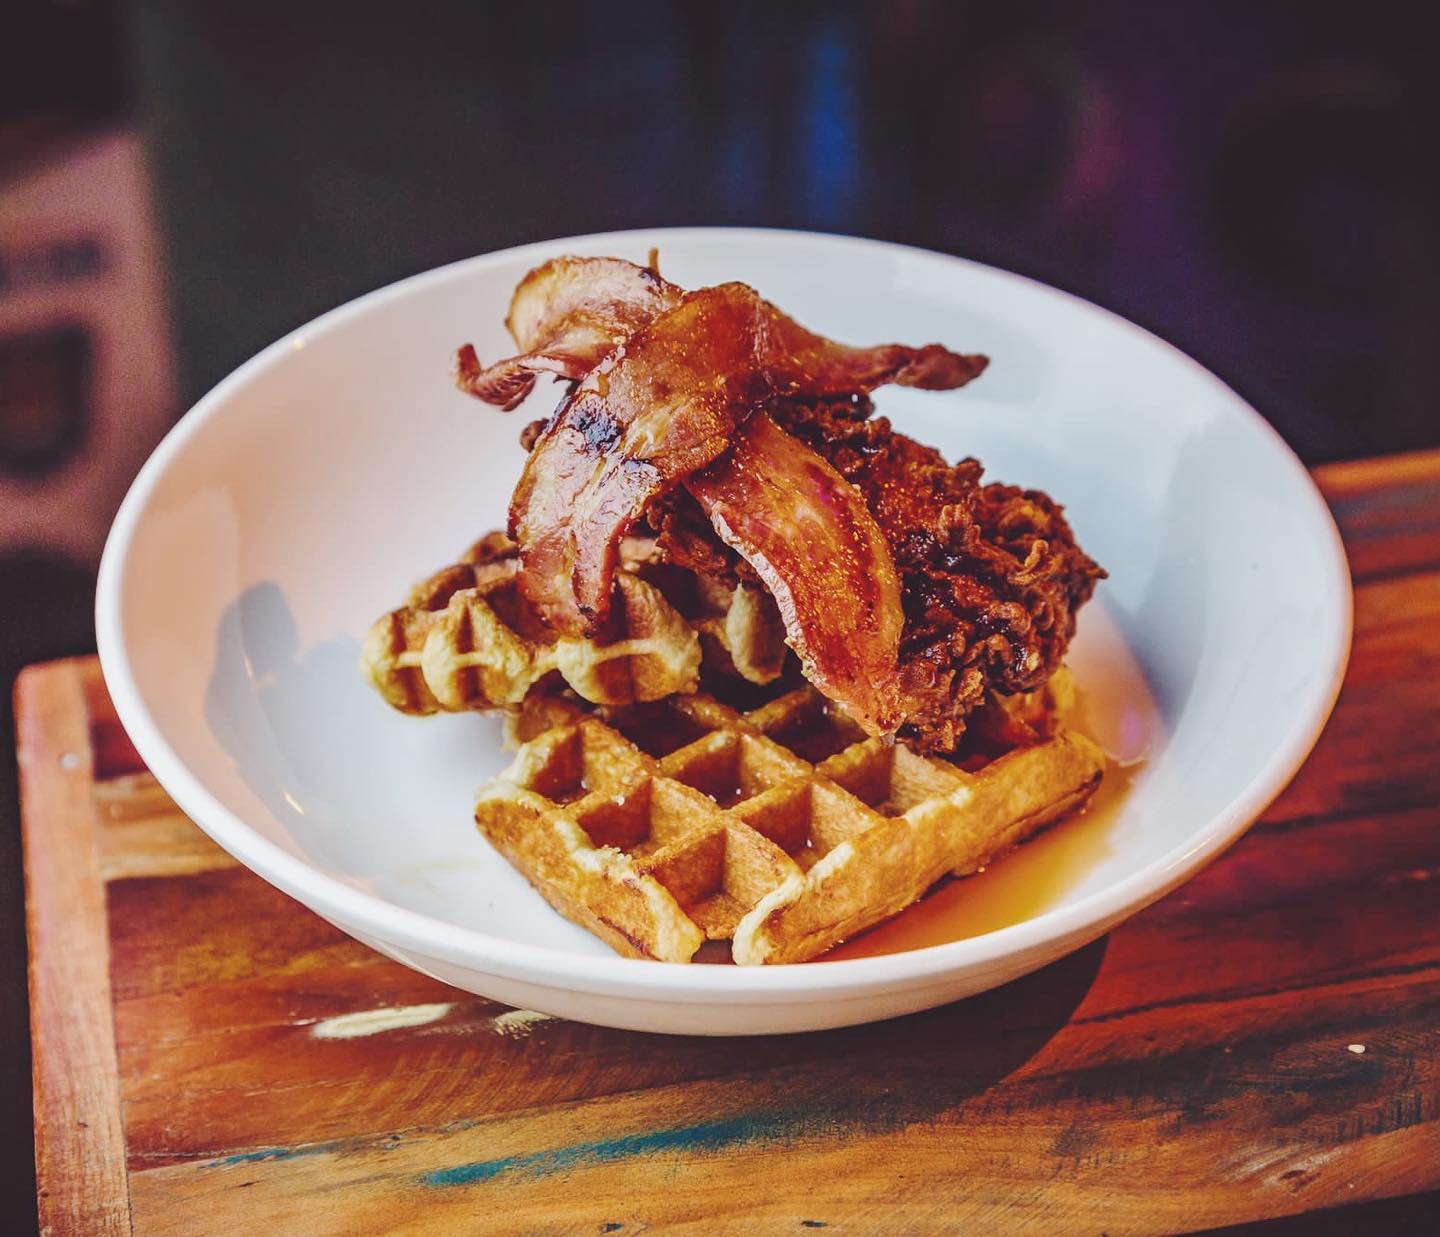 The new bottomless brunch with fried chicken waffles and endless pints of beer, The Manc